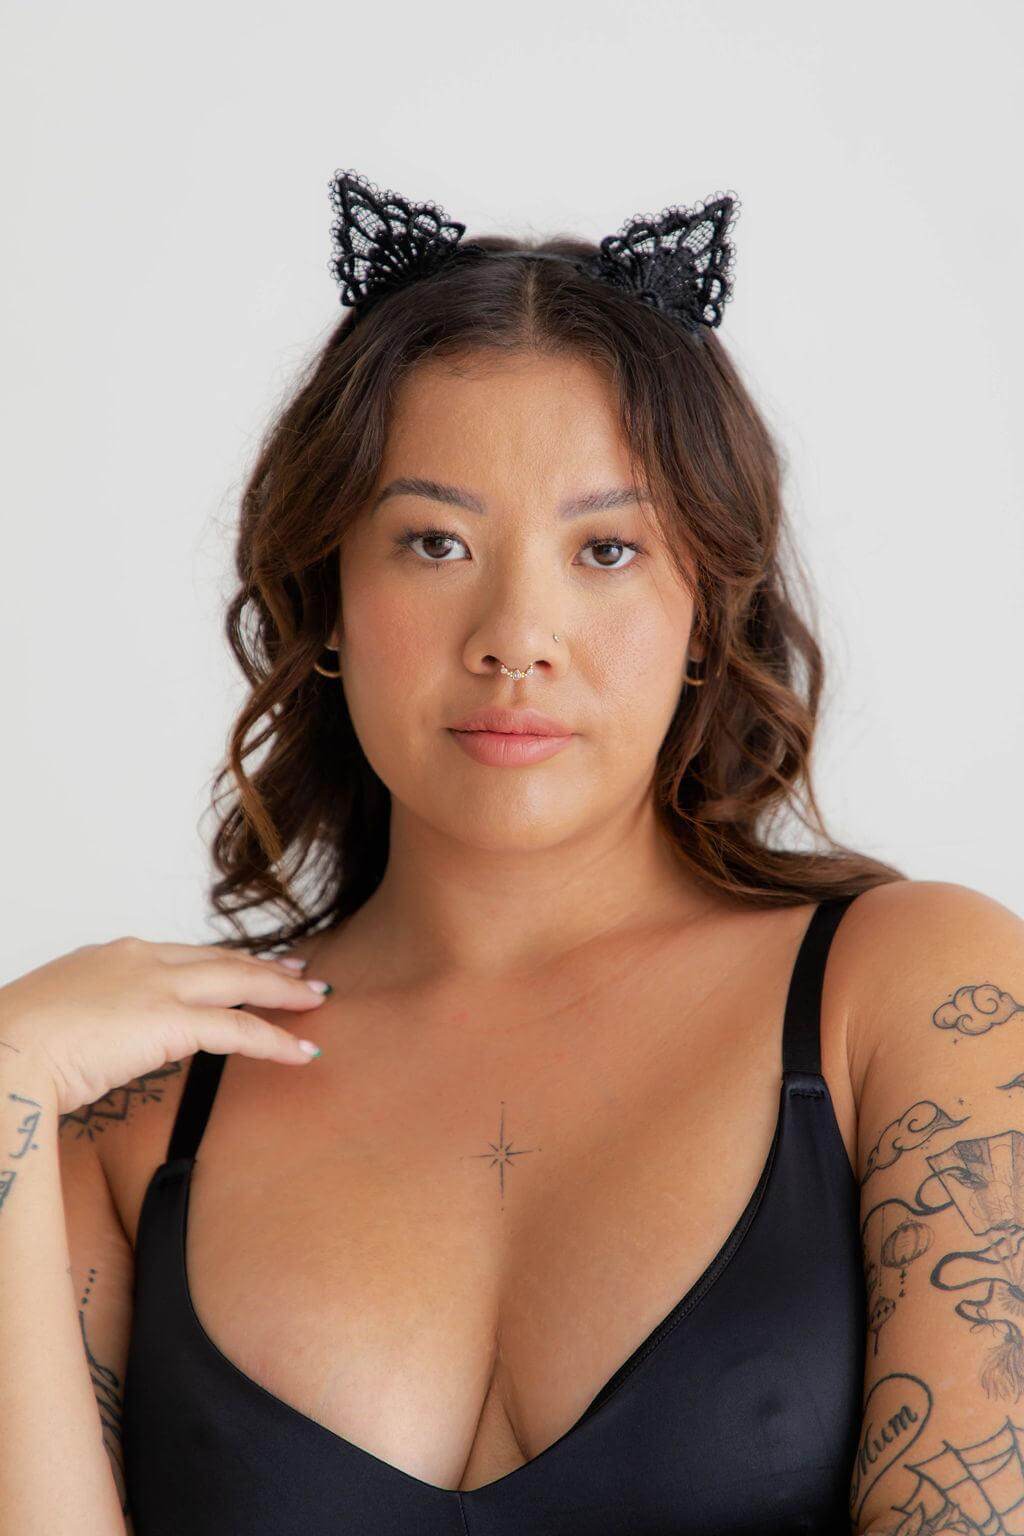 Black Kitty Ears - $8.00 - Accessories - Naked Curve